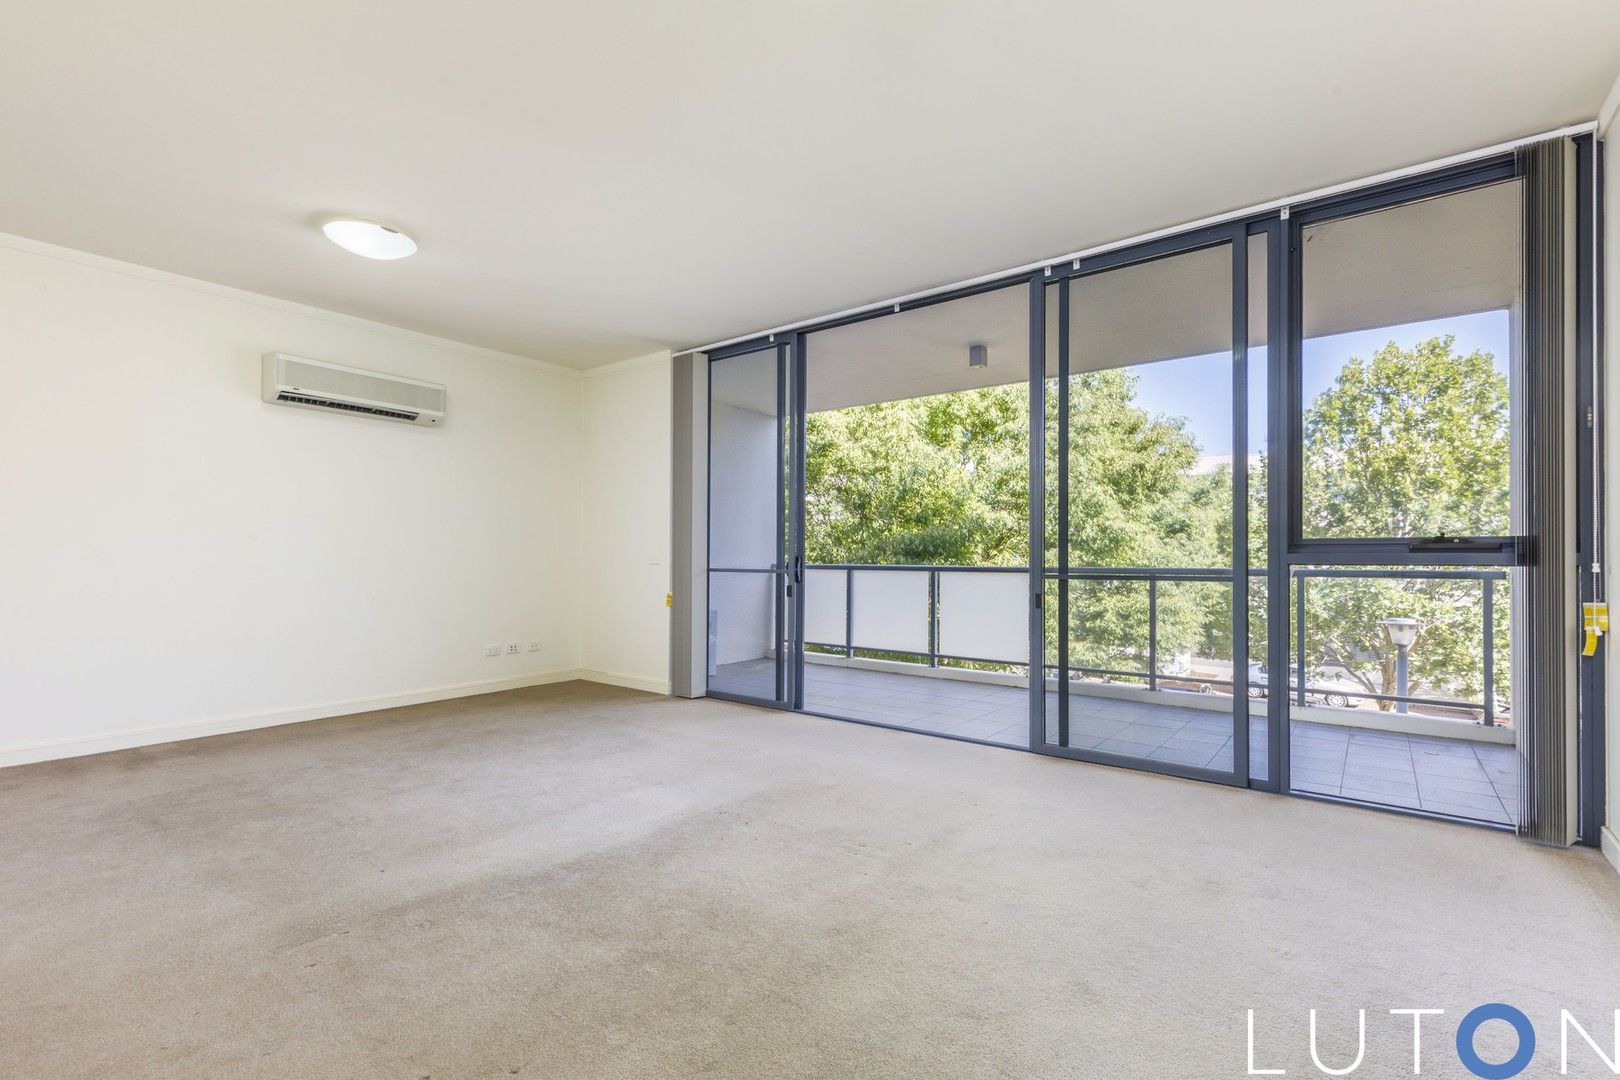 2 bedrooms Apartment / Unit / Flat in 68/102 Giles Street KINGSTON ACT, 2604